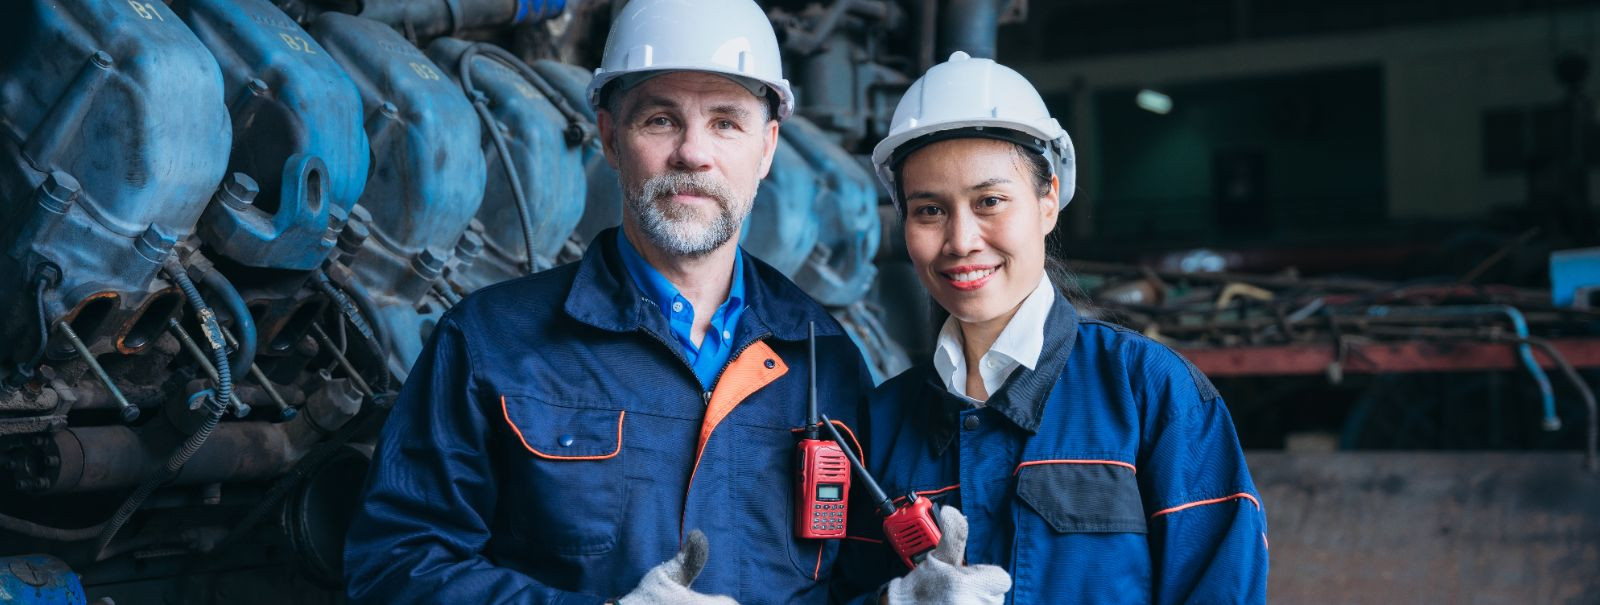 Custom workwear refers to attire specifically designed to meet the unique requirements of a business and its employees. It goes beyond the standard issue unifor